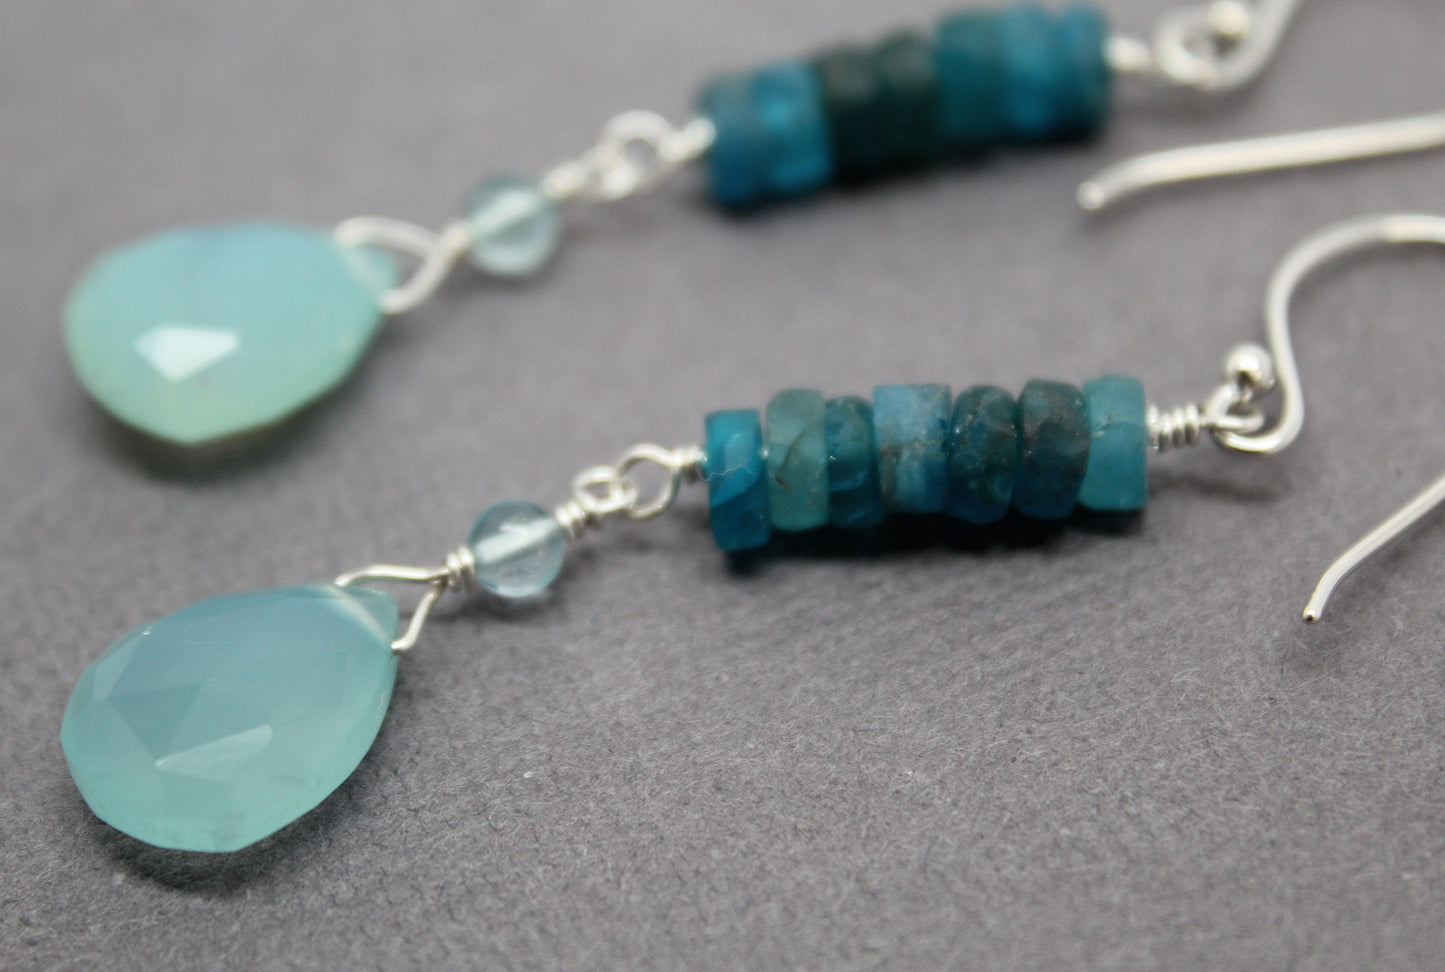 Apatite and Chalcedony Earrings in Sterling Silver